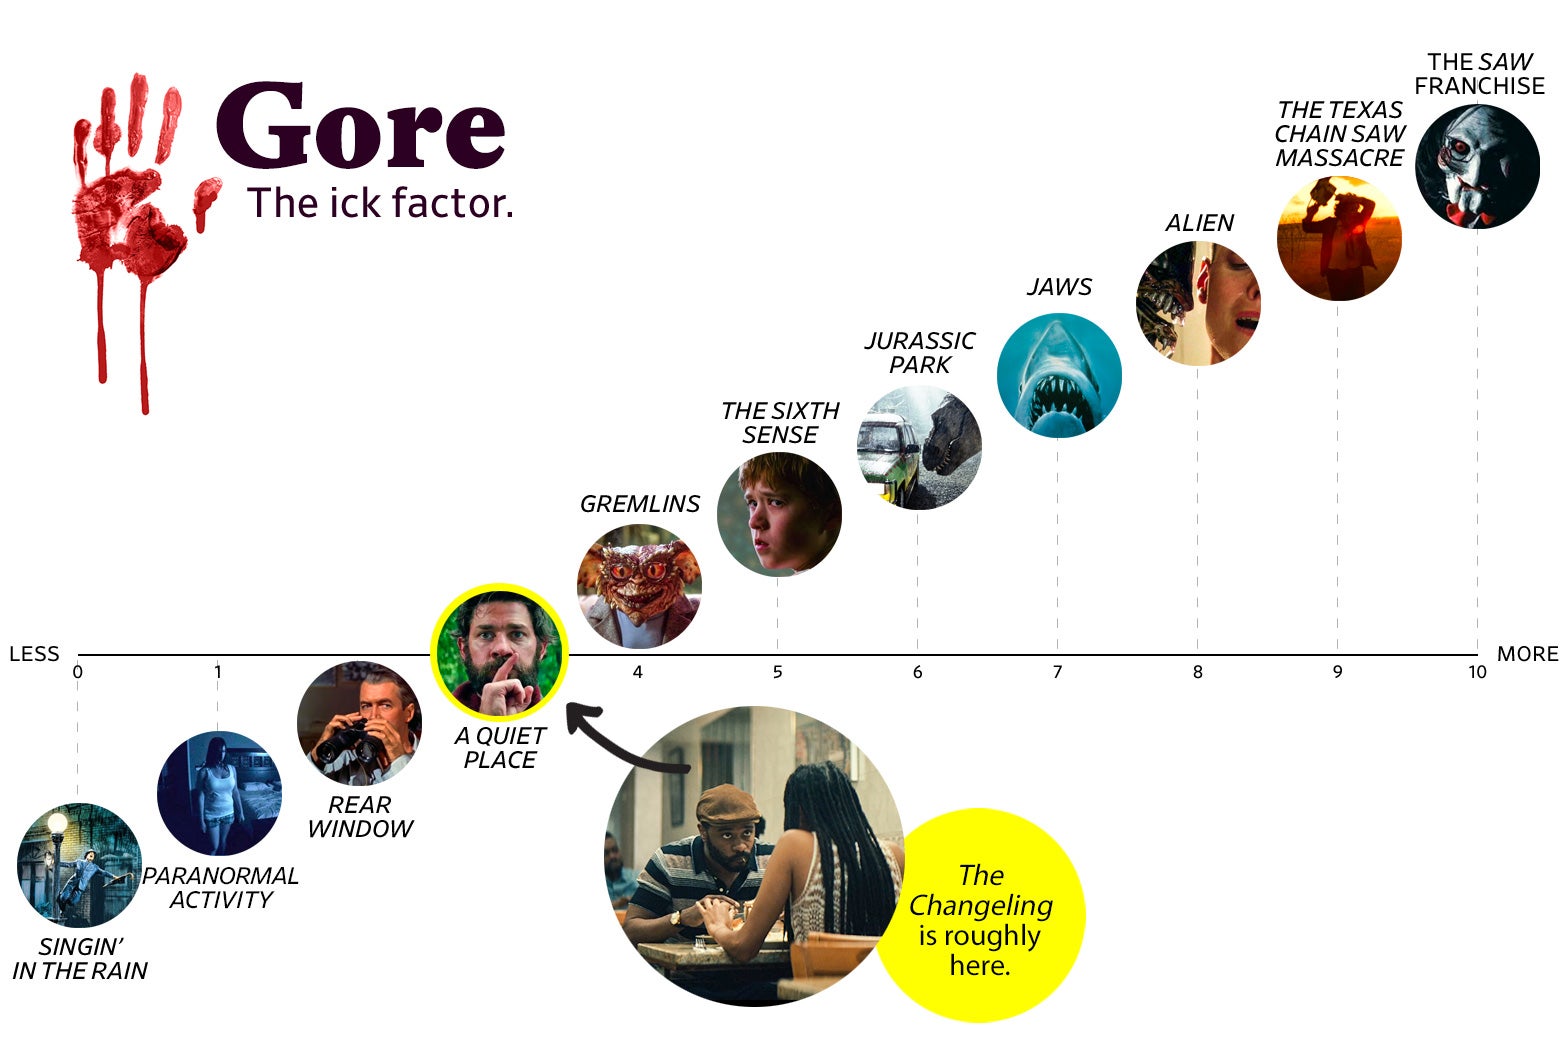 A chart titled “Gore: The Ick Factor” shows that The Changeling ranks a 3 in gore, roughly the same as A Quiet Place. The scale ranges from Singin’ in the Rain (0) to the Saw Franchise (10).